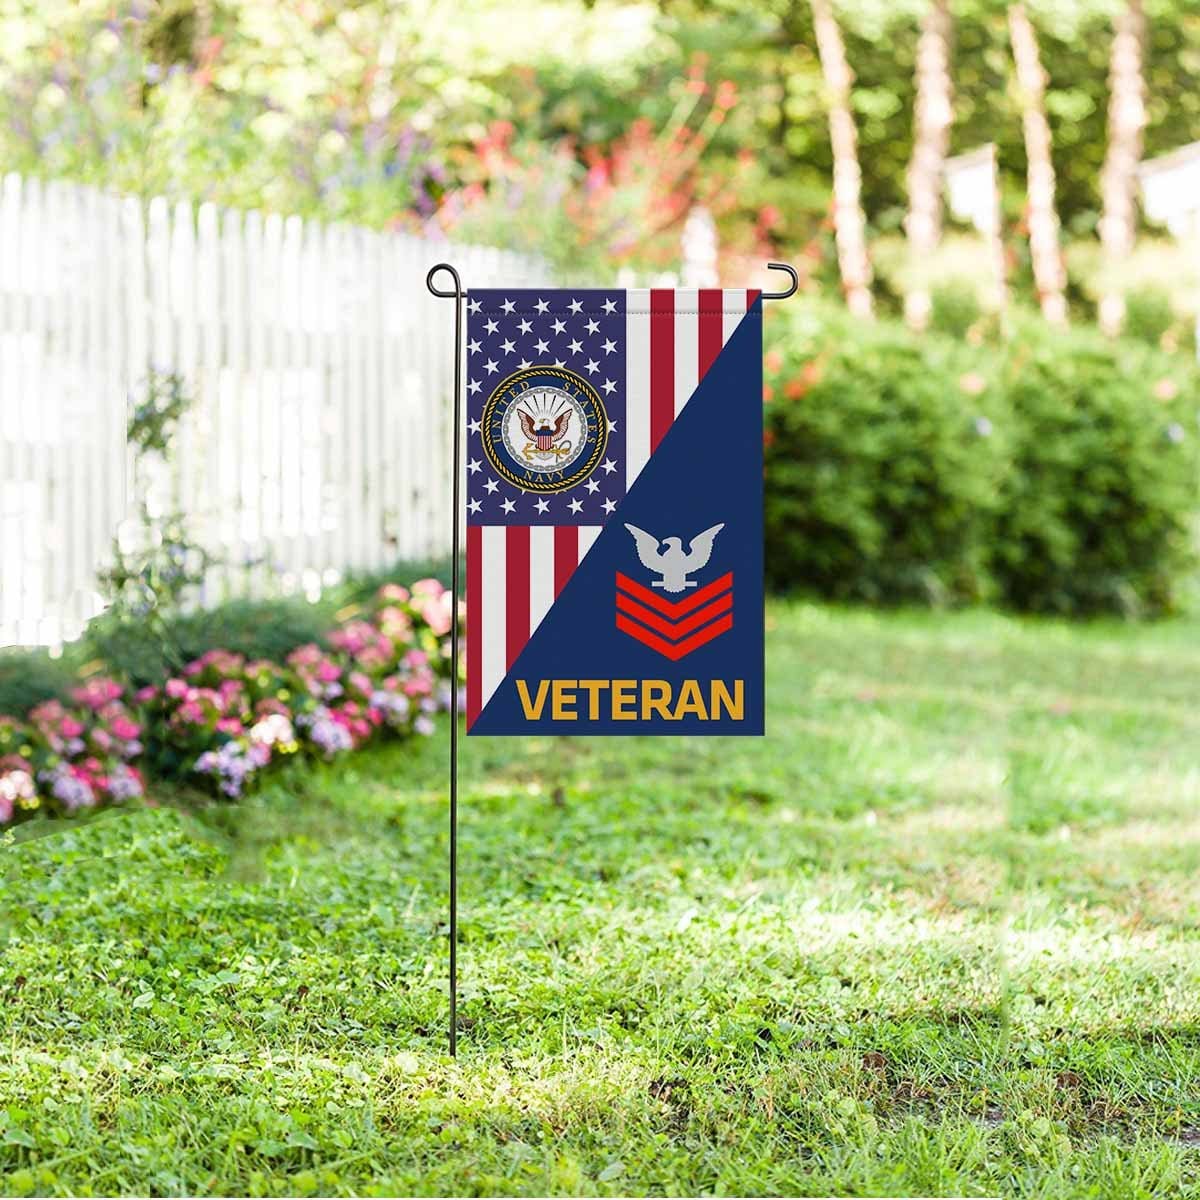 US Navy E-6 Petty Officer First Class E6 PO1 Collar Device Veteran Garden Flag/Yard Flag 12 inches x 18 inches Twin-Side Printing-GDFlag-Navy-Collar-Veterans Nation